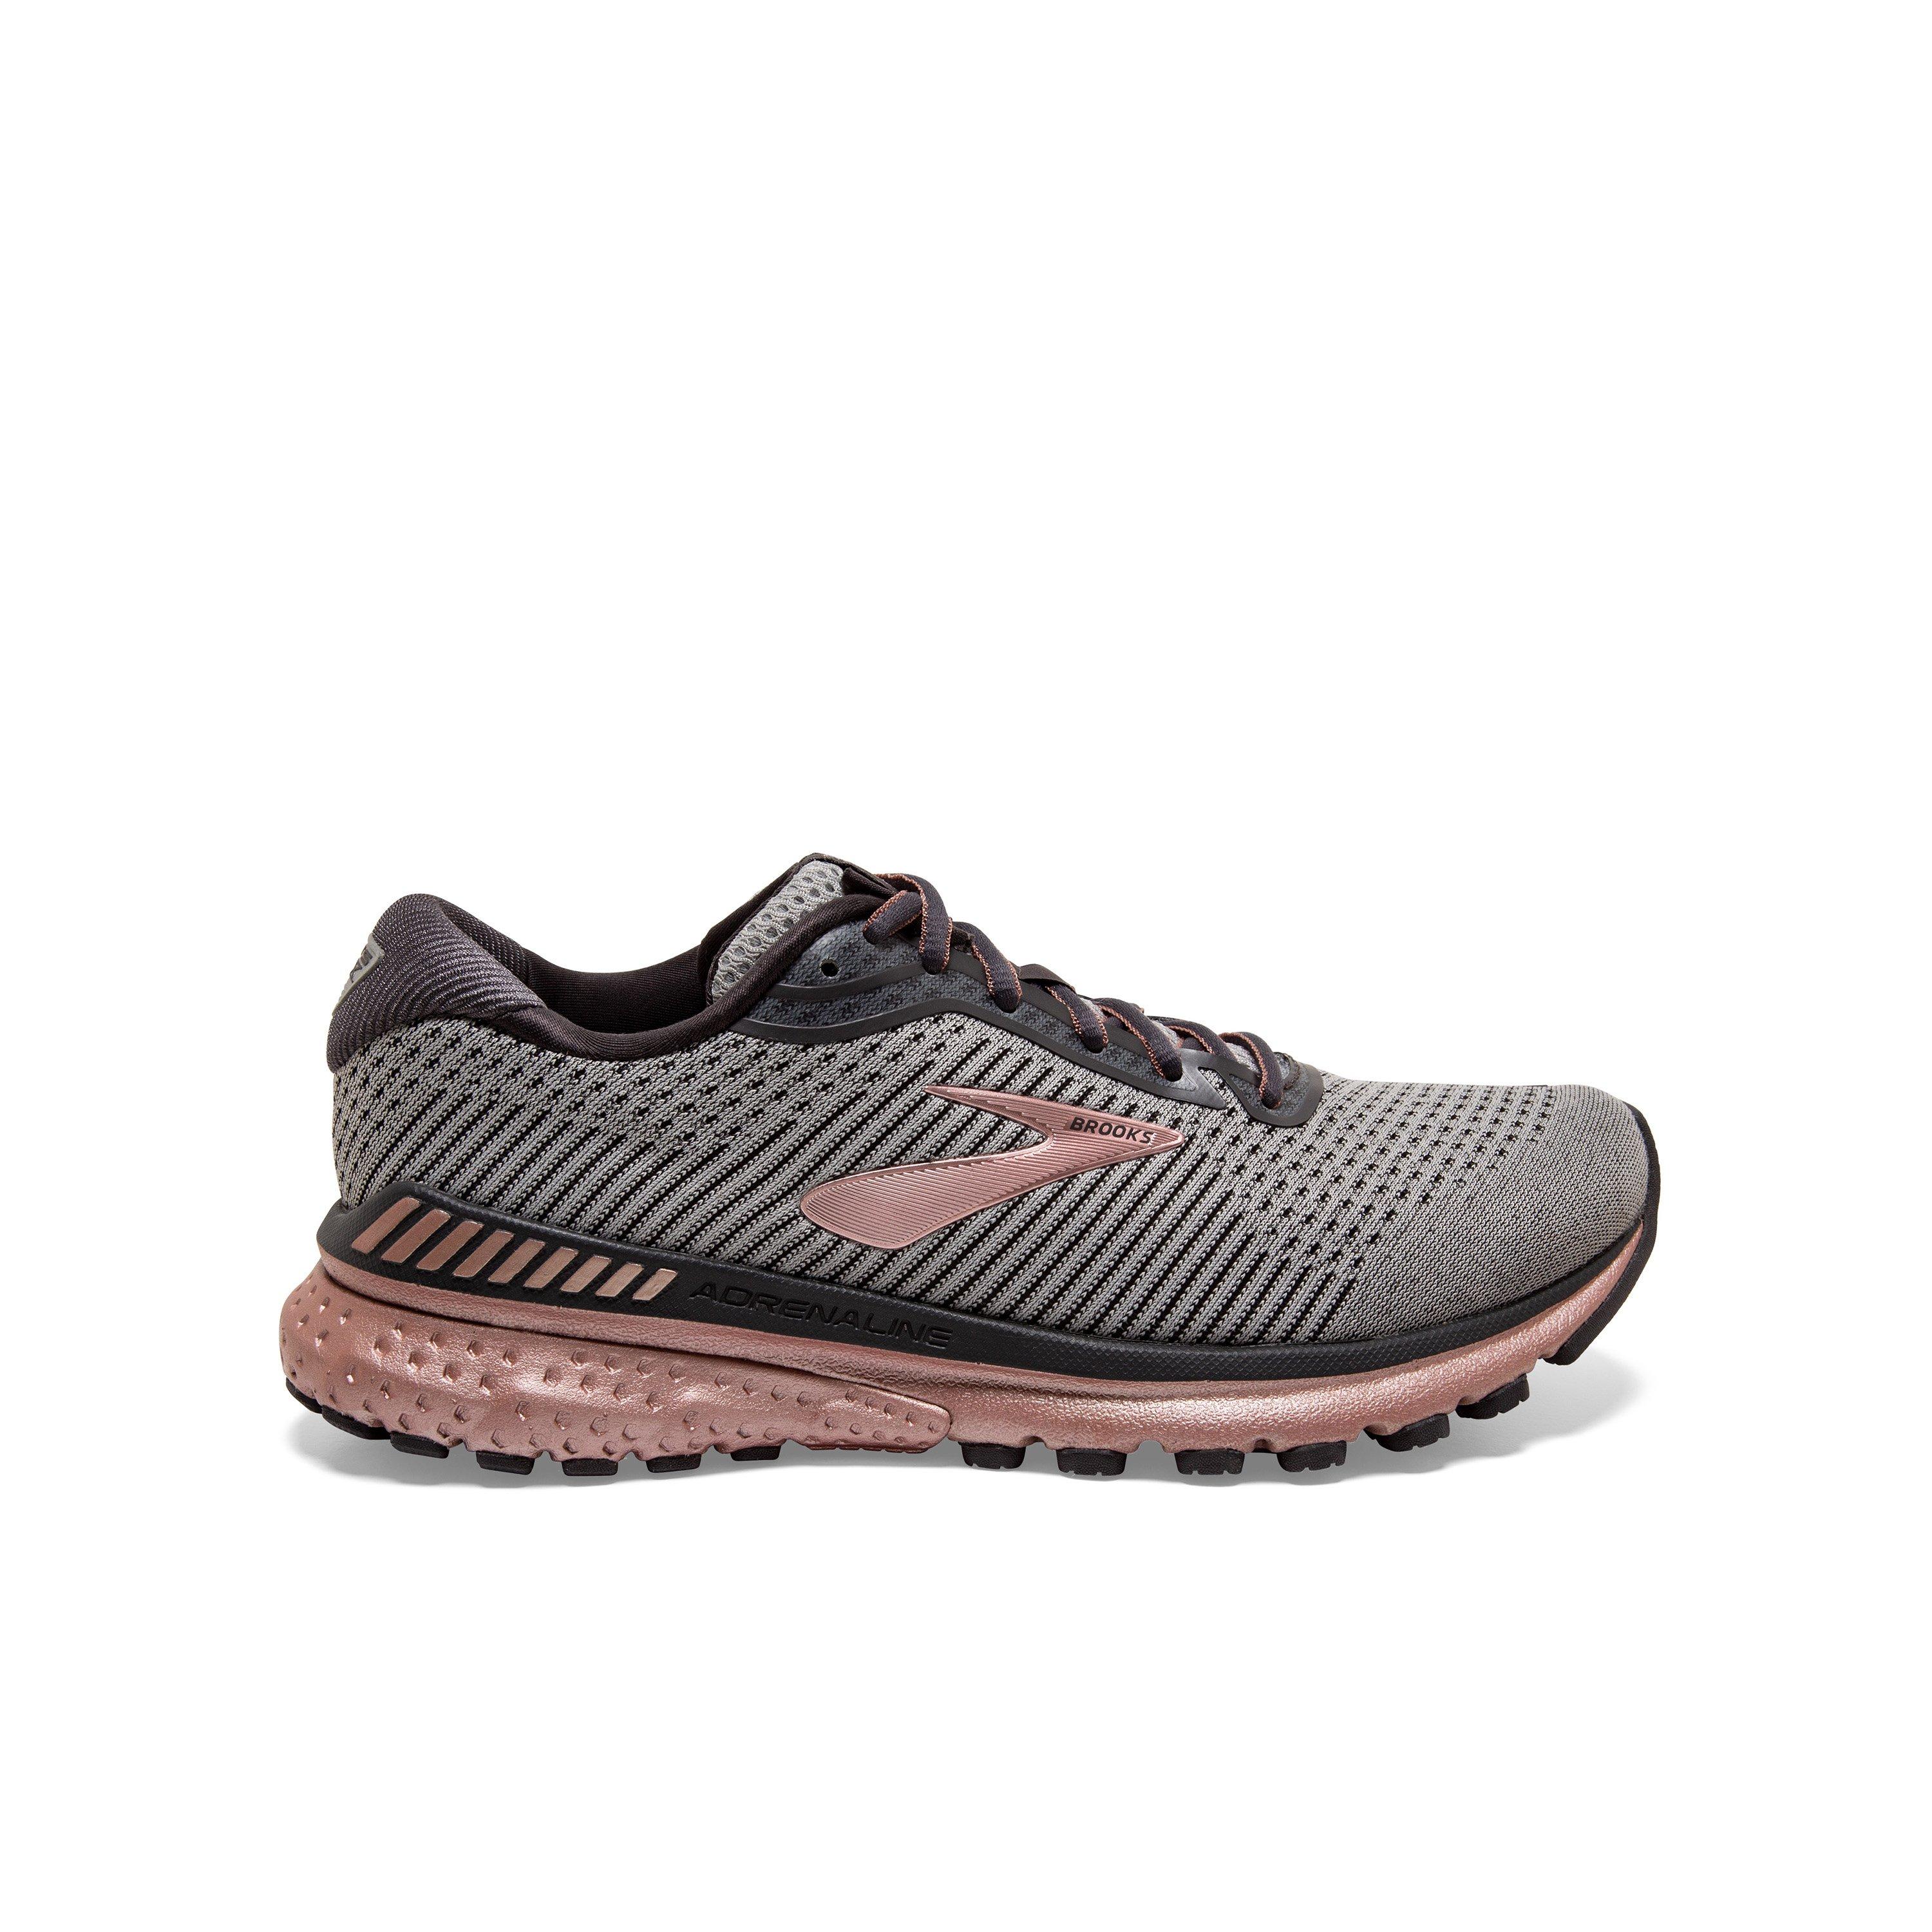 rose gold brooks running shoes Online Shopping